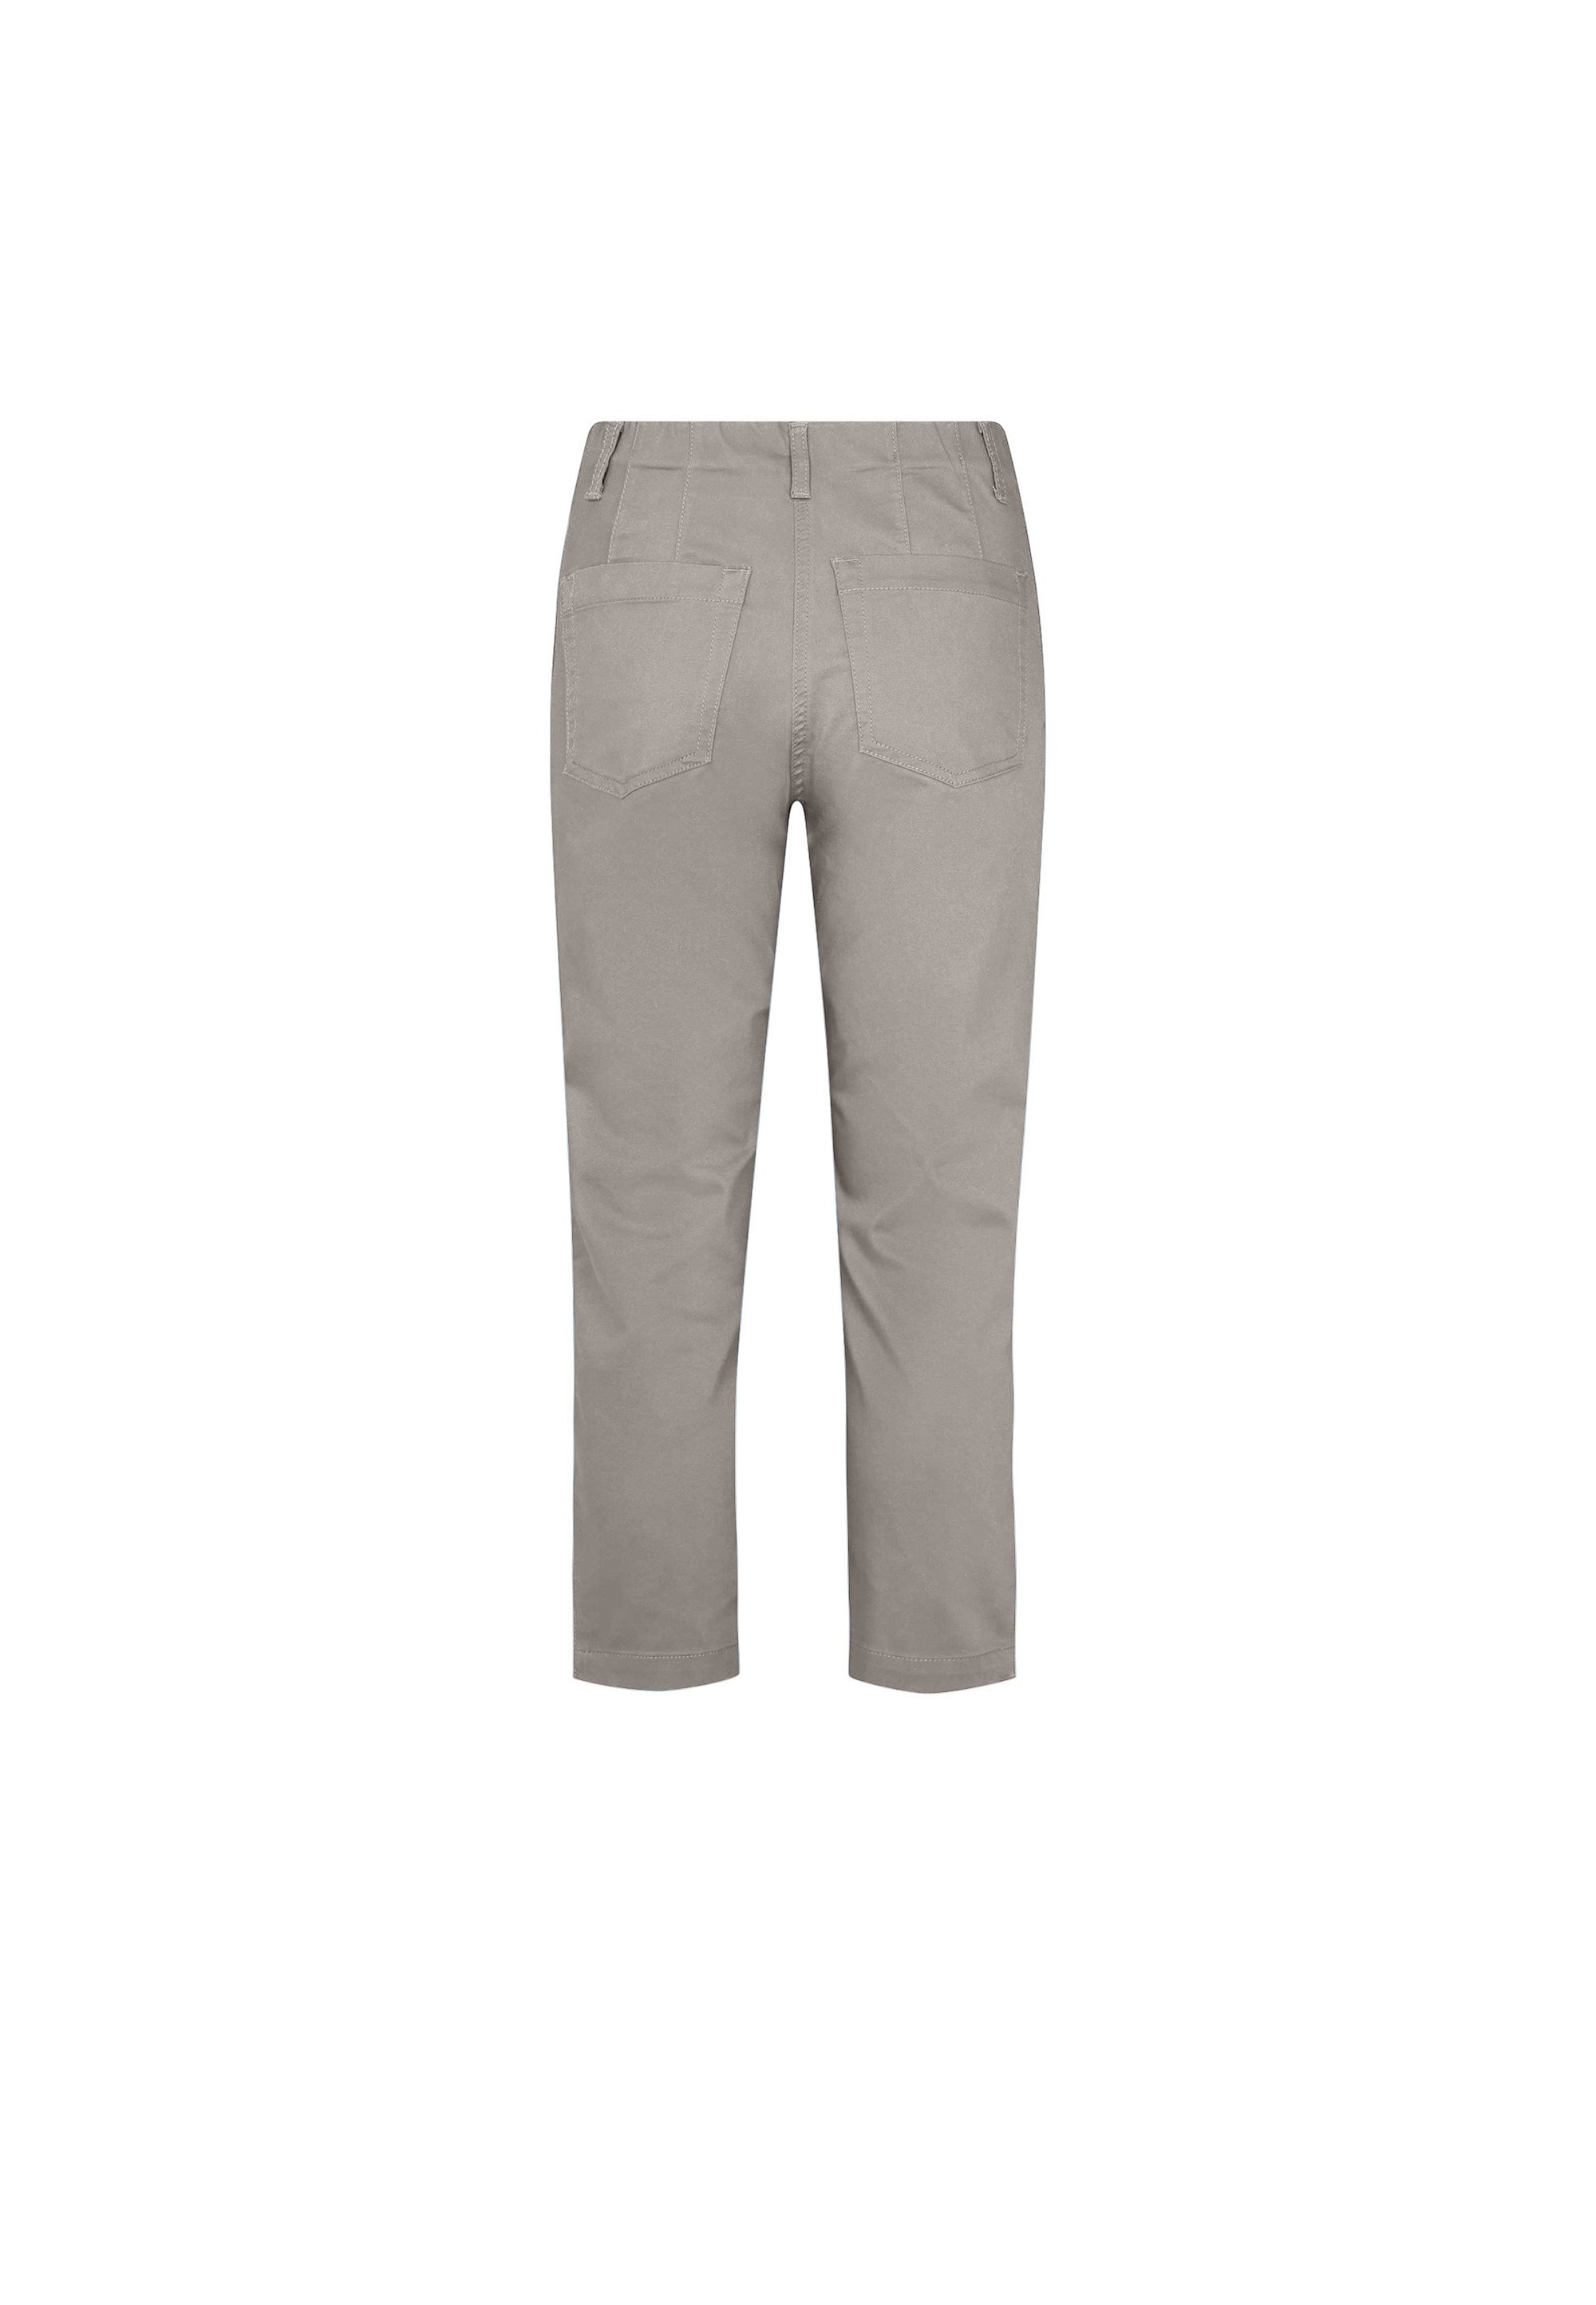 LAURIE Patricia Pure Regular Crop Trousers REGULAR 25000 Grey Sand